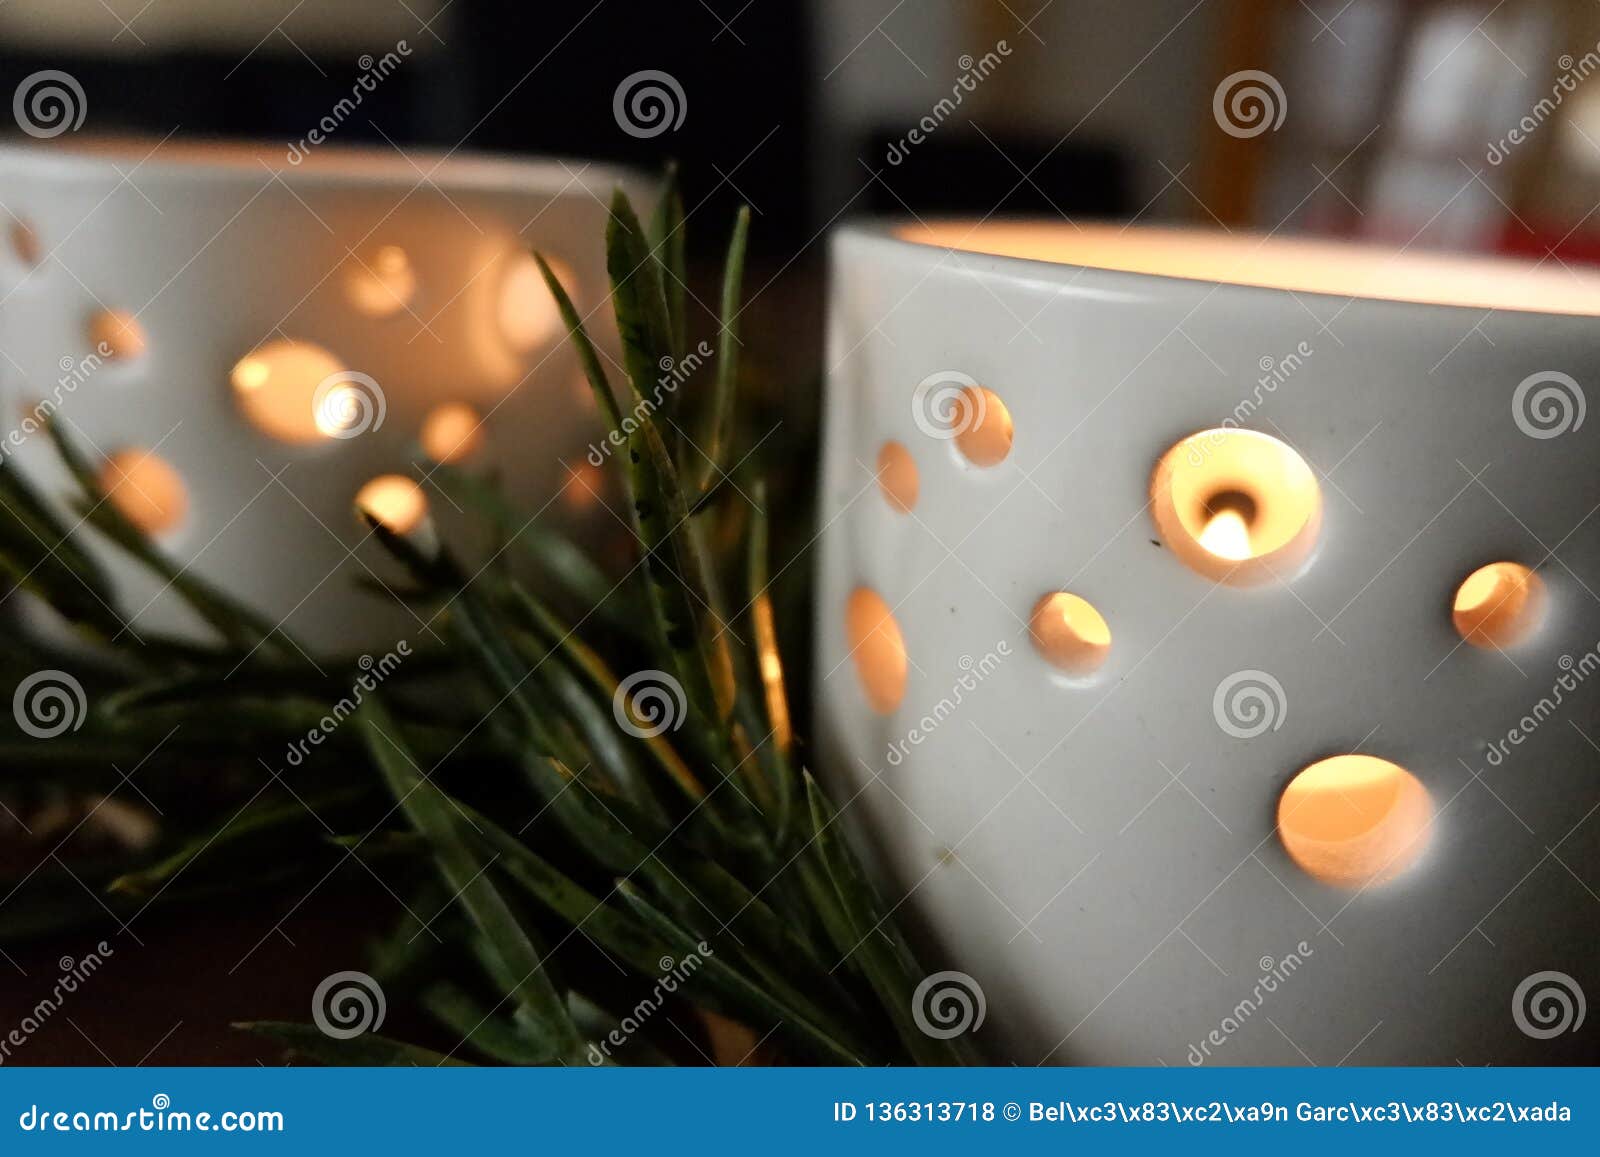 Candles for a Warm Illumination Stock Photo - Image of intimate ...